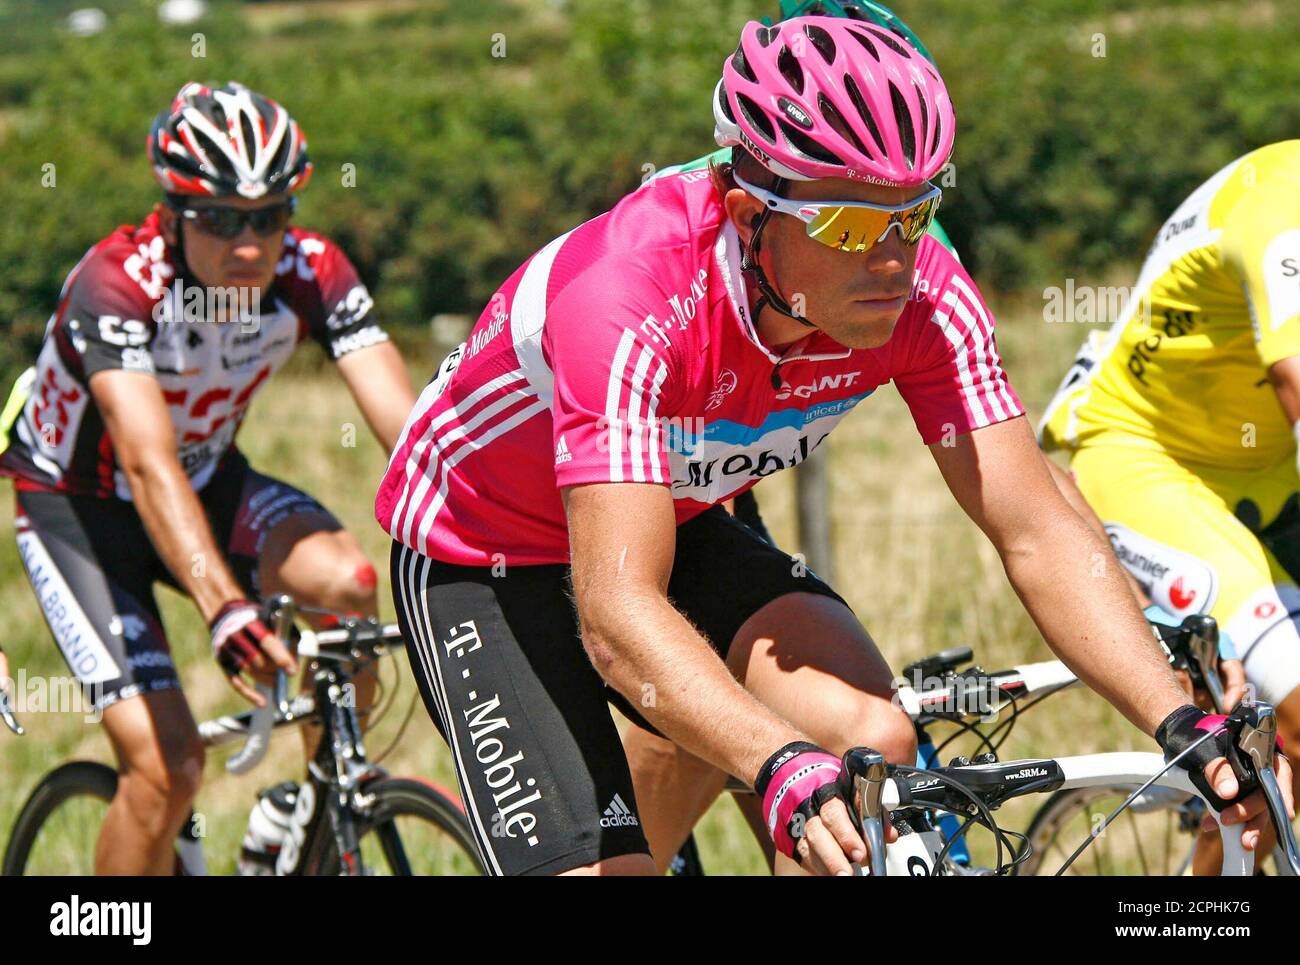 T-Mobile team rider Kim Kirschen of Luxemburg cycles during the sixth stage  of the 94th Tour de France cycling race between Semur-en-Auxois and Bourg -en-Bresse, July 13, 2007. REUTERS/Stefano Rellandini (FRANCE Stock Photo -